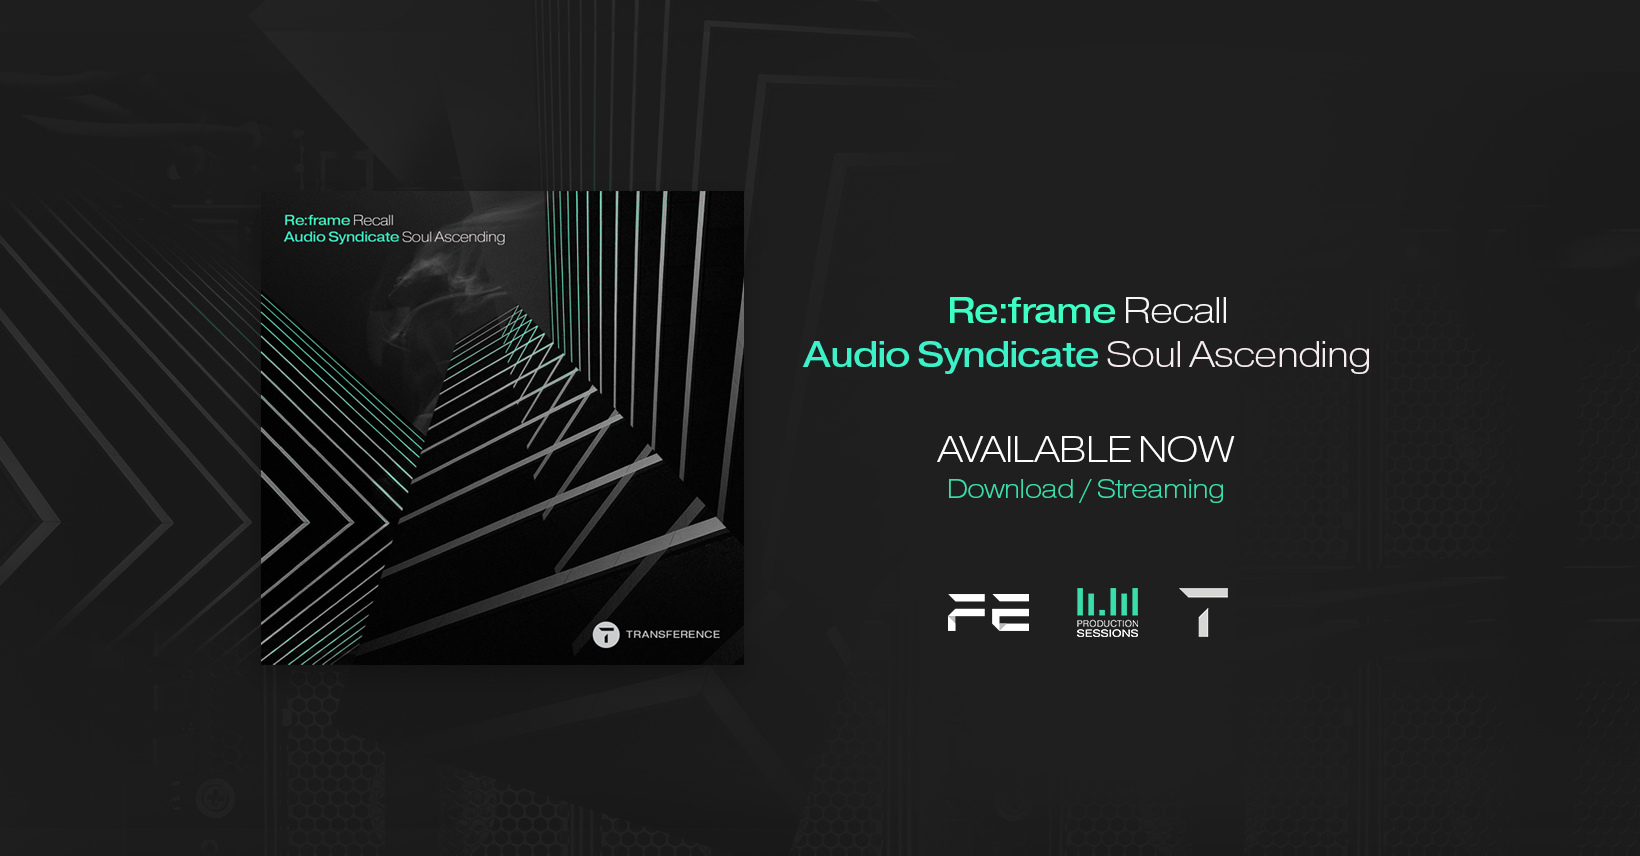 Transference_Re-frame-Audio-Syndicate_LAUNCH_Banner_facebook-1640x856px_V2